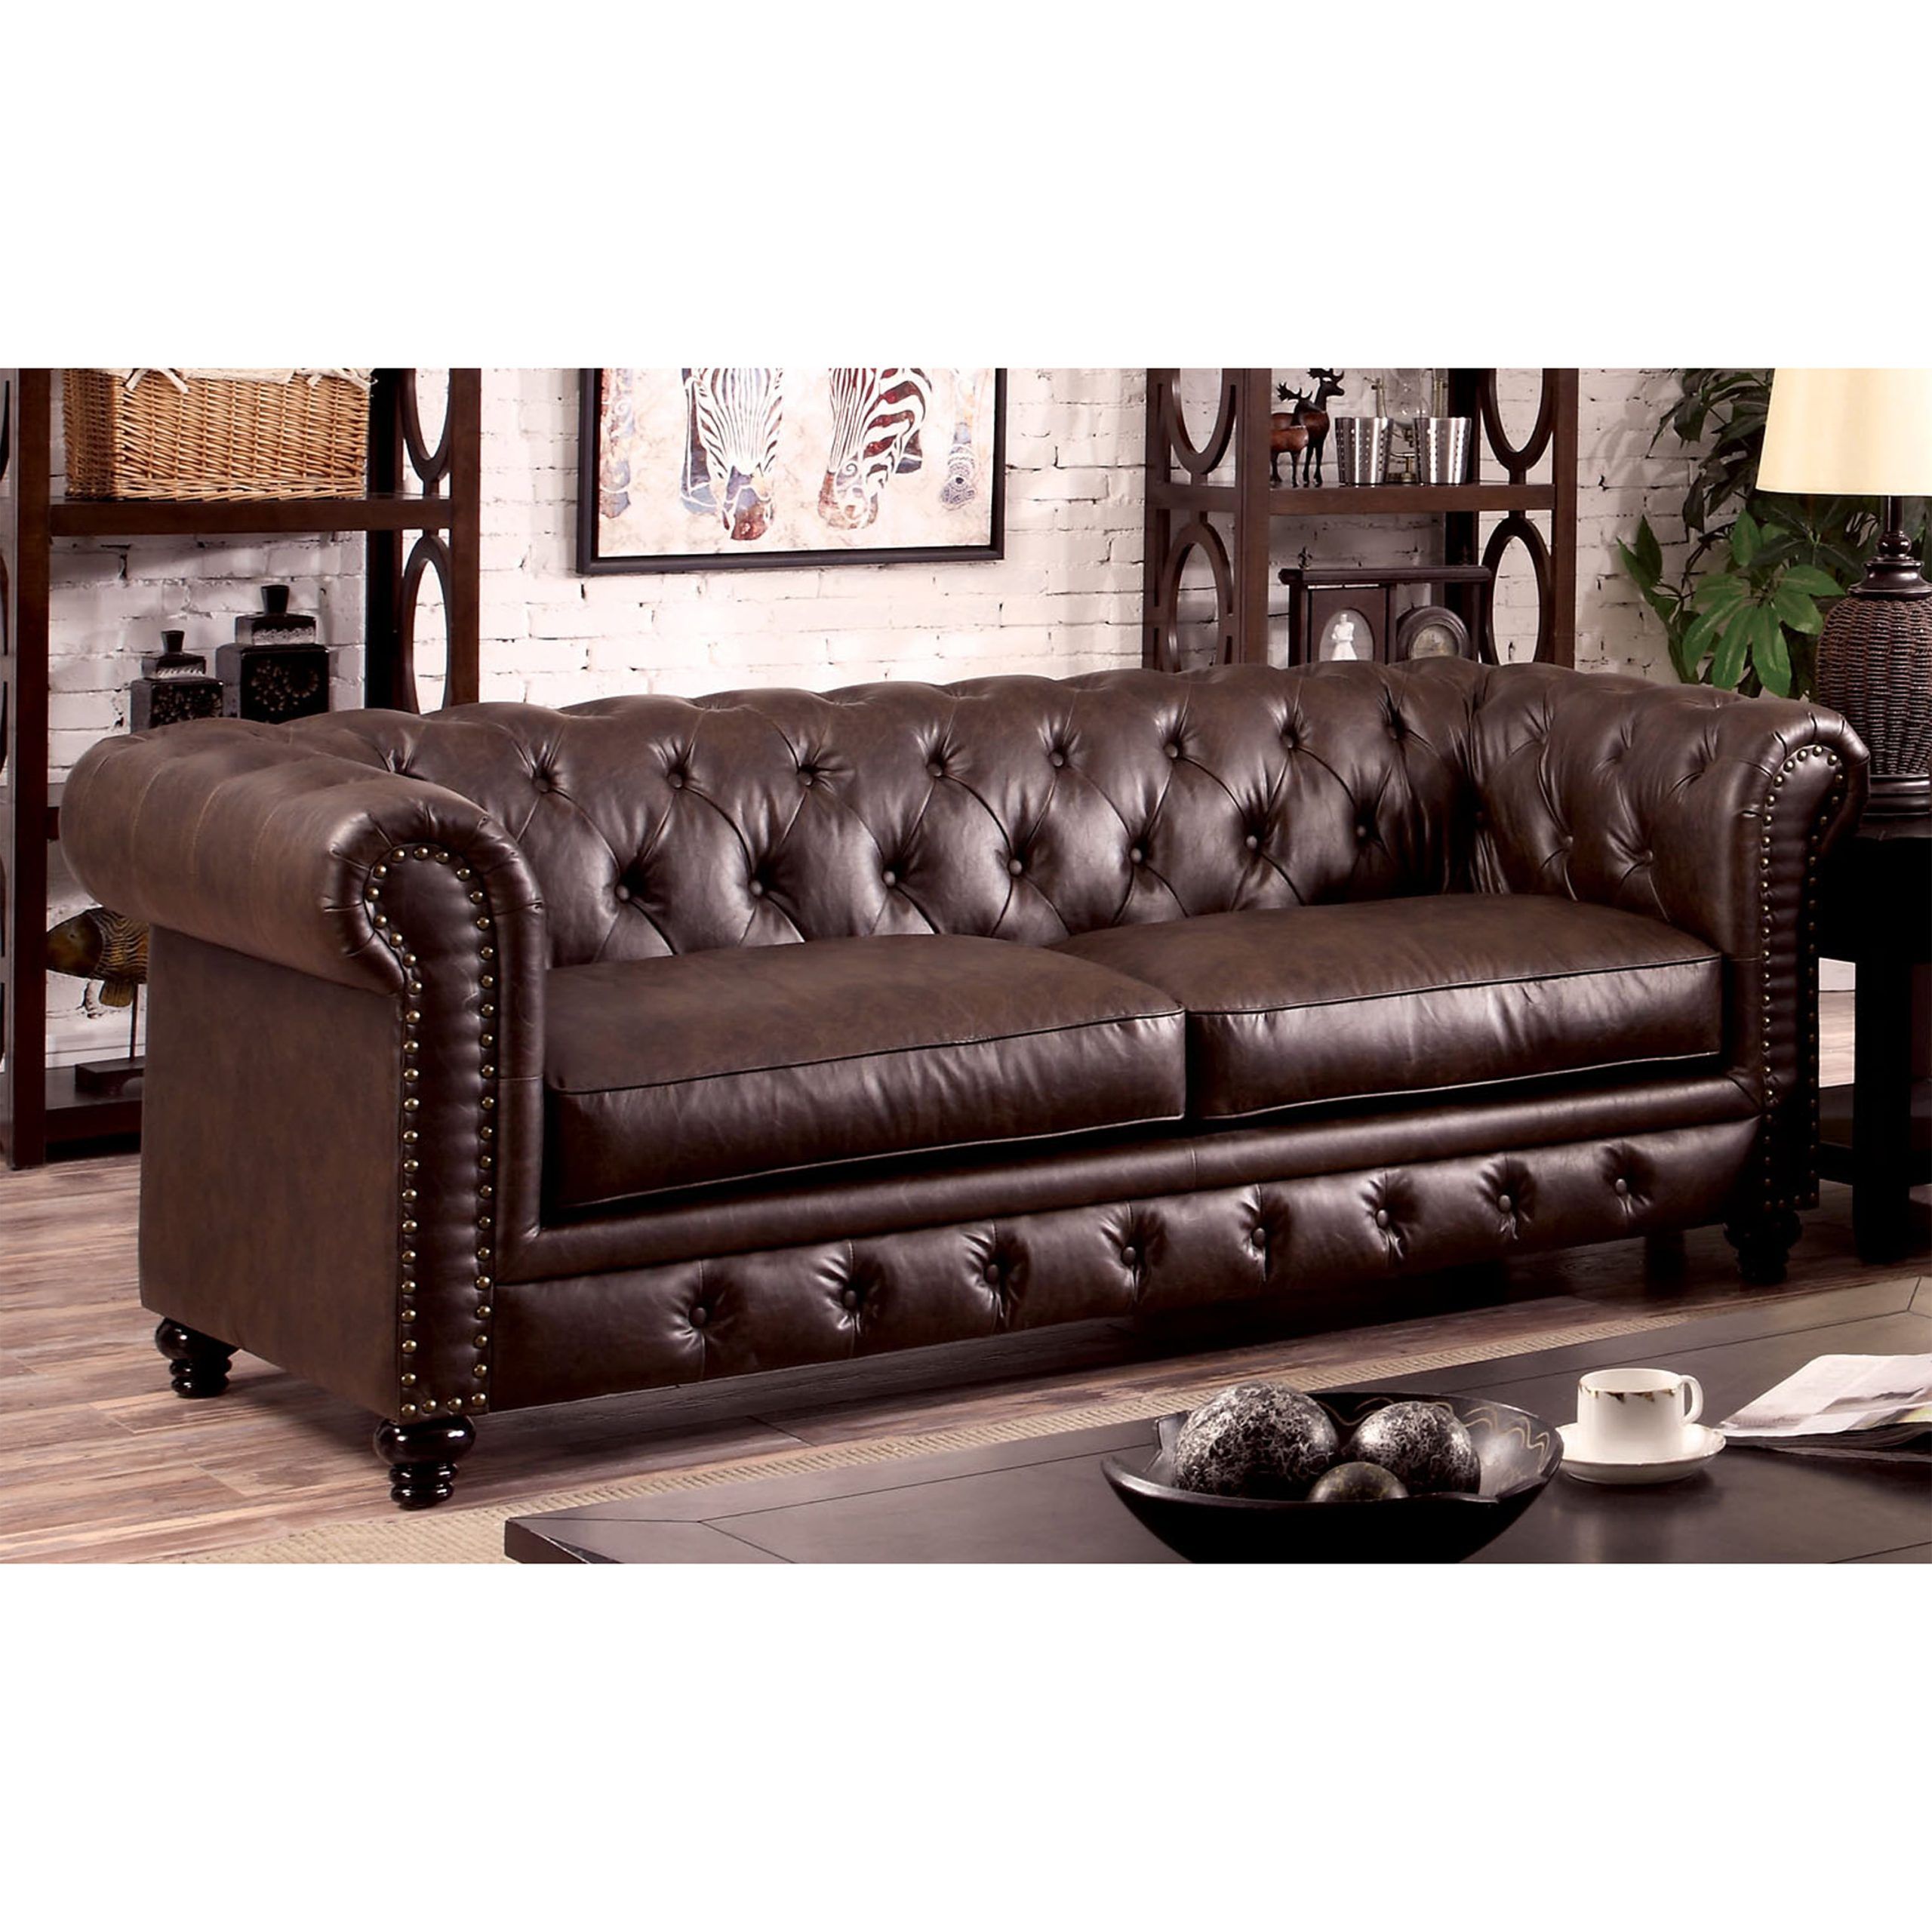 Furniture Of America Tufted Glam Faux Leather Nyssa Tuxedo Sofa, Brown Within Faux Leather Sofas In Dark Brown (View 8 of 20)